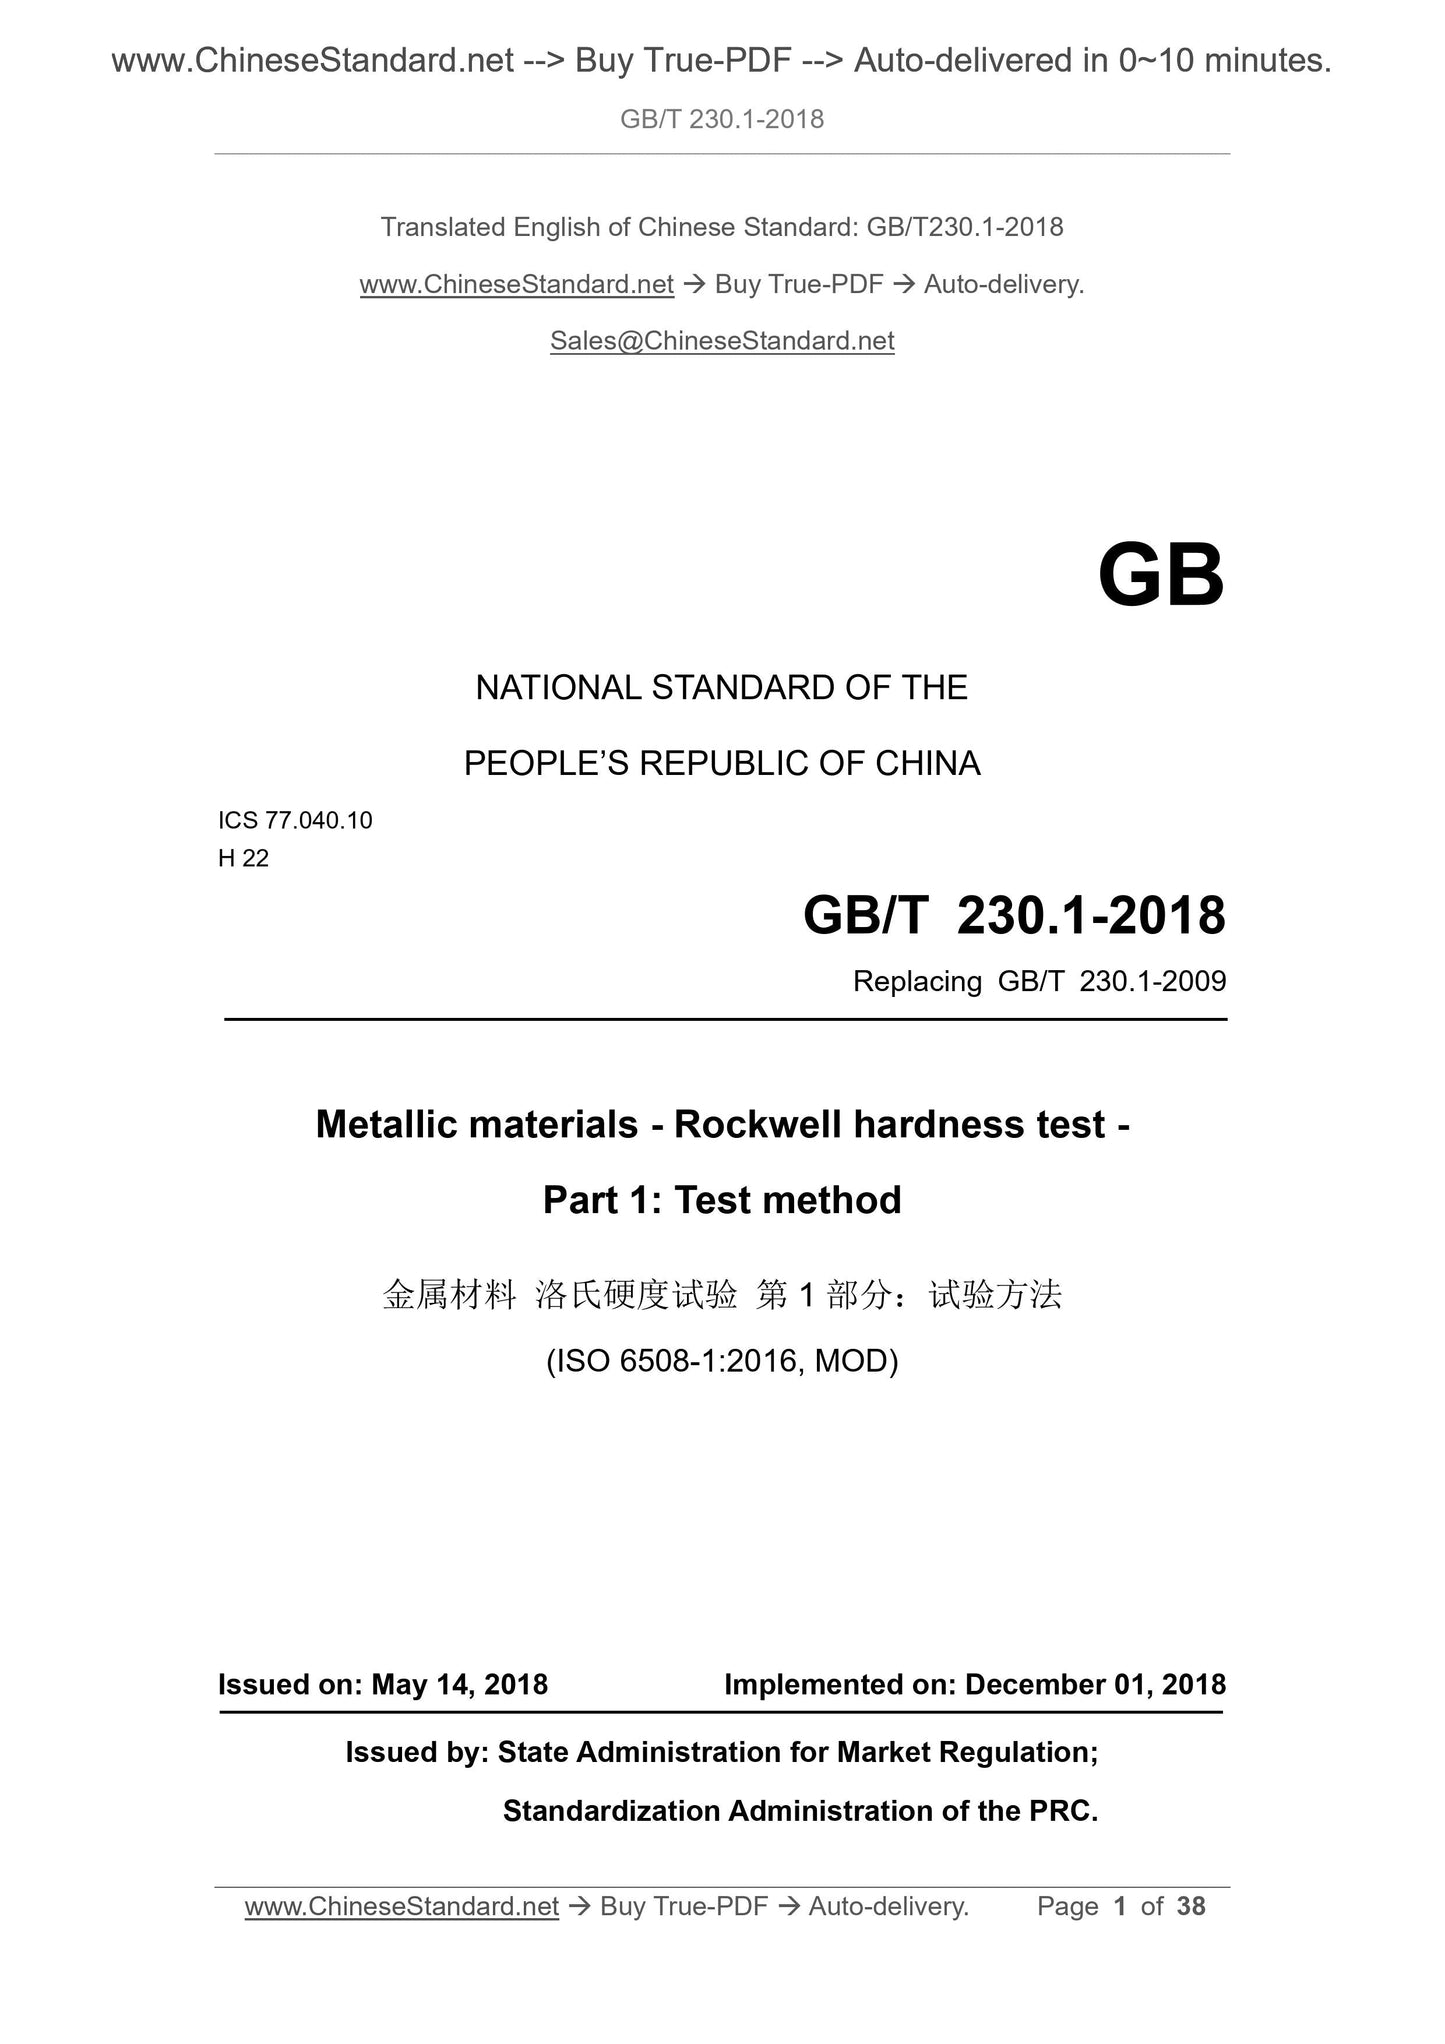 GB/T 230.1-2018 Page 1